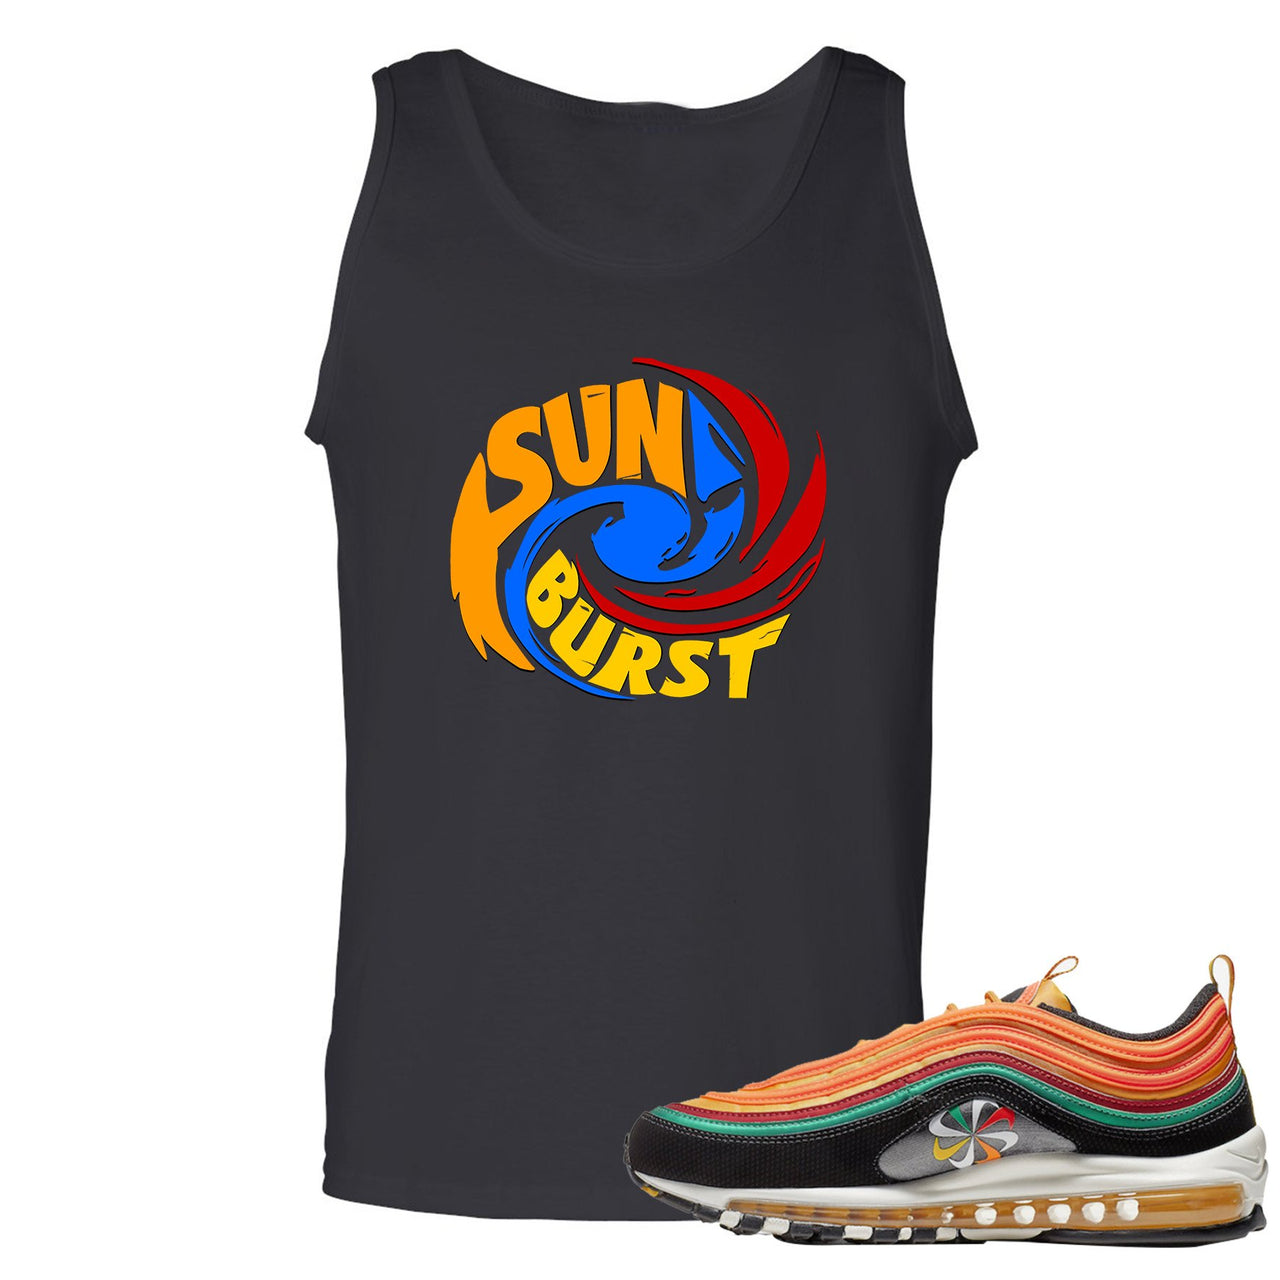 Printed on the front of the Air Max 97 Sunburst black sneaker matching tank top is the Sunburst Hurricane logo